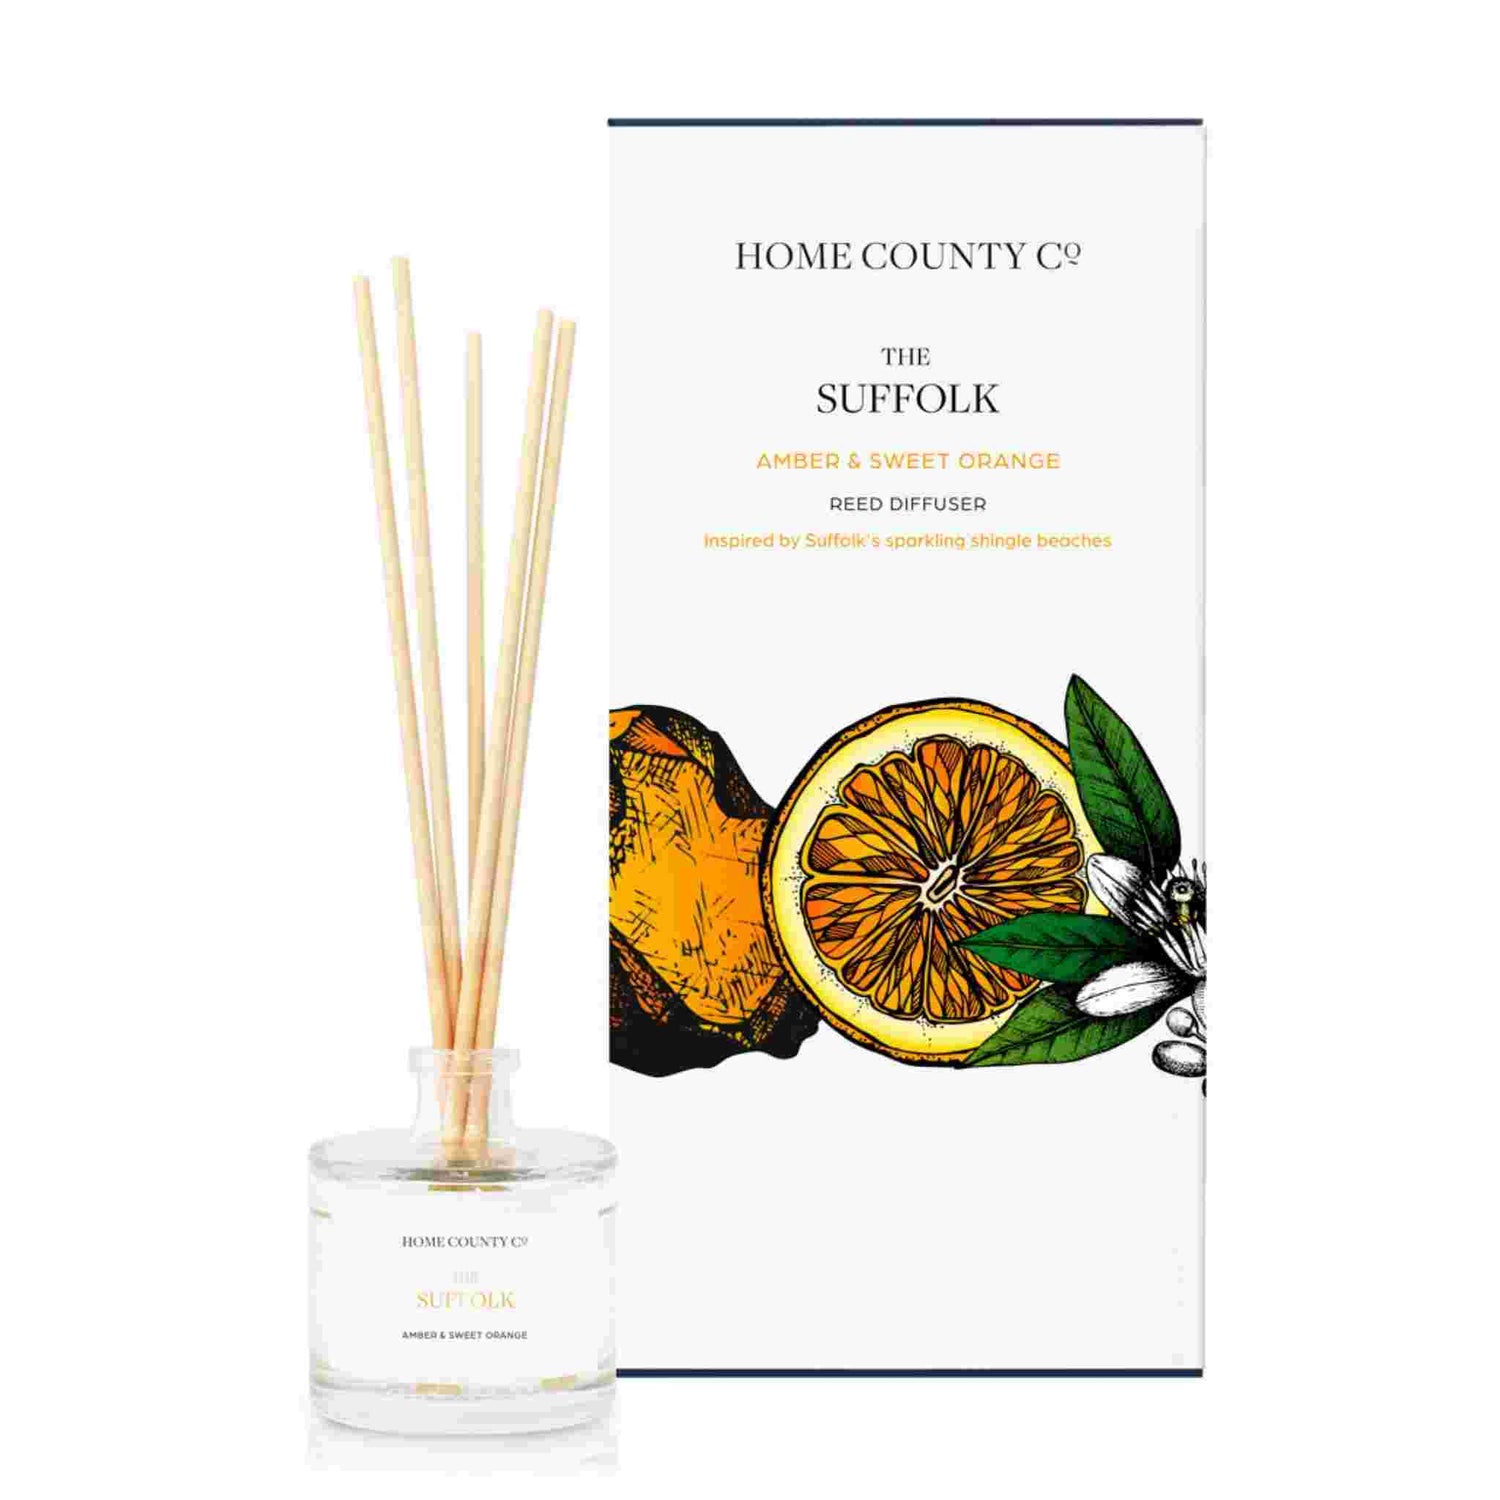 An amber and sweet orange scented reed diffuser from Home County Co. The vegan friendly reed diffuser is shown next to the eco friendly reed diffuser box packaging.